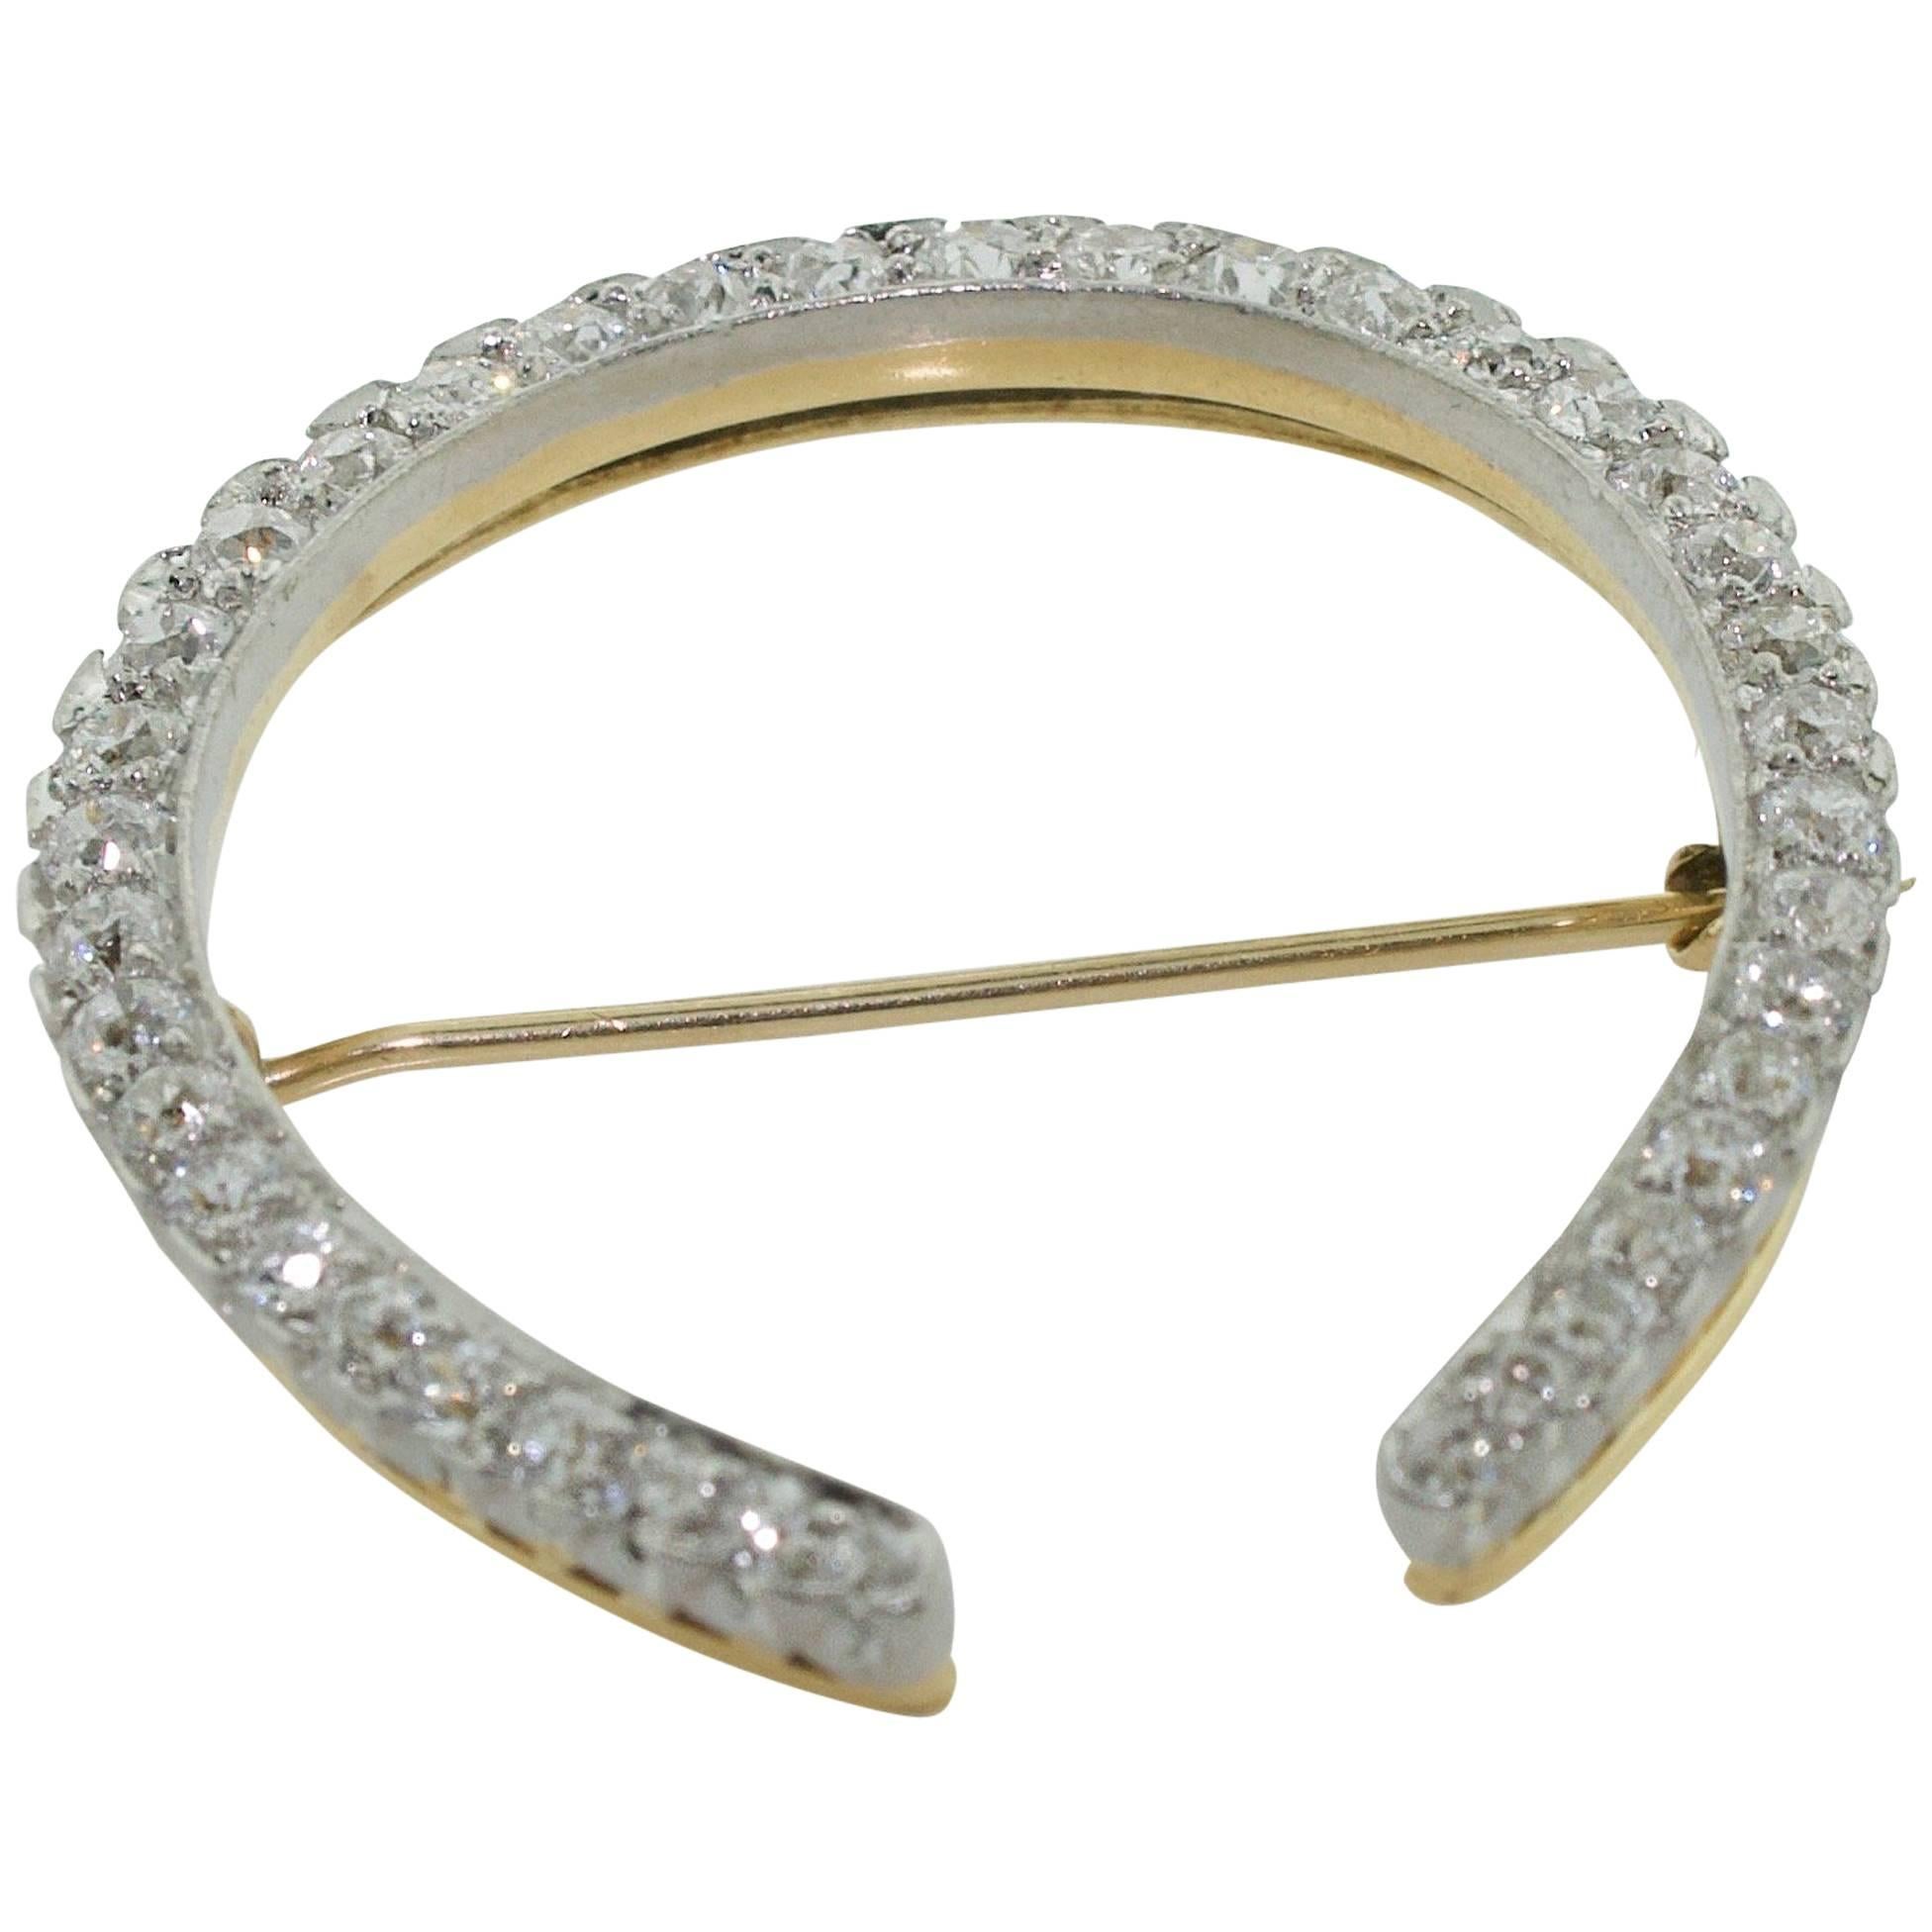 "Lucky" Horseshoe" Brooch in Platinum on 18 Karat Yellow Gold, circa 1915 For Sale